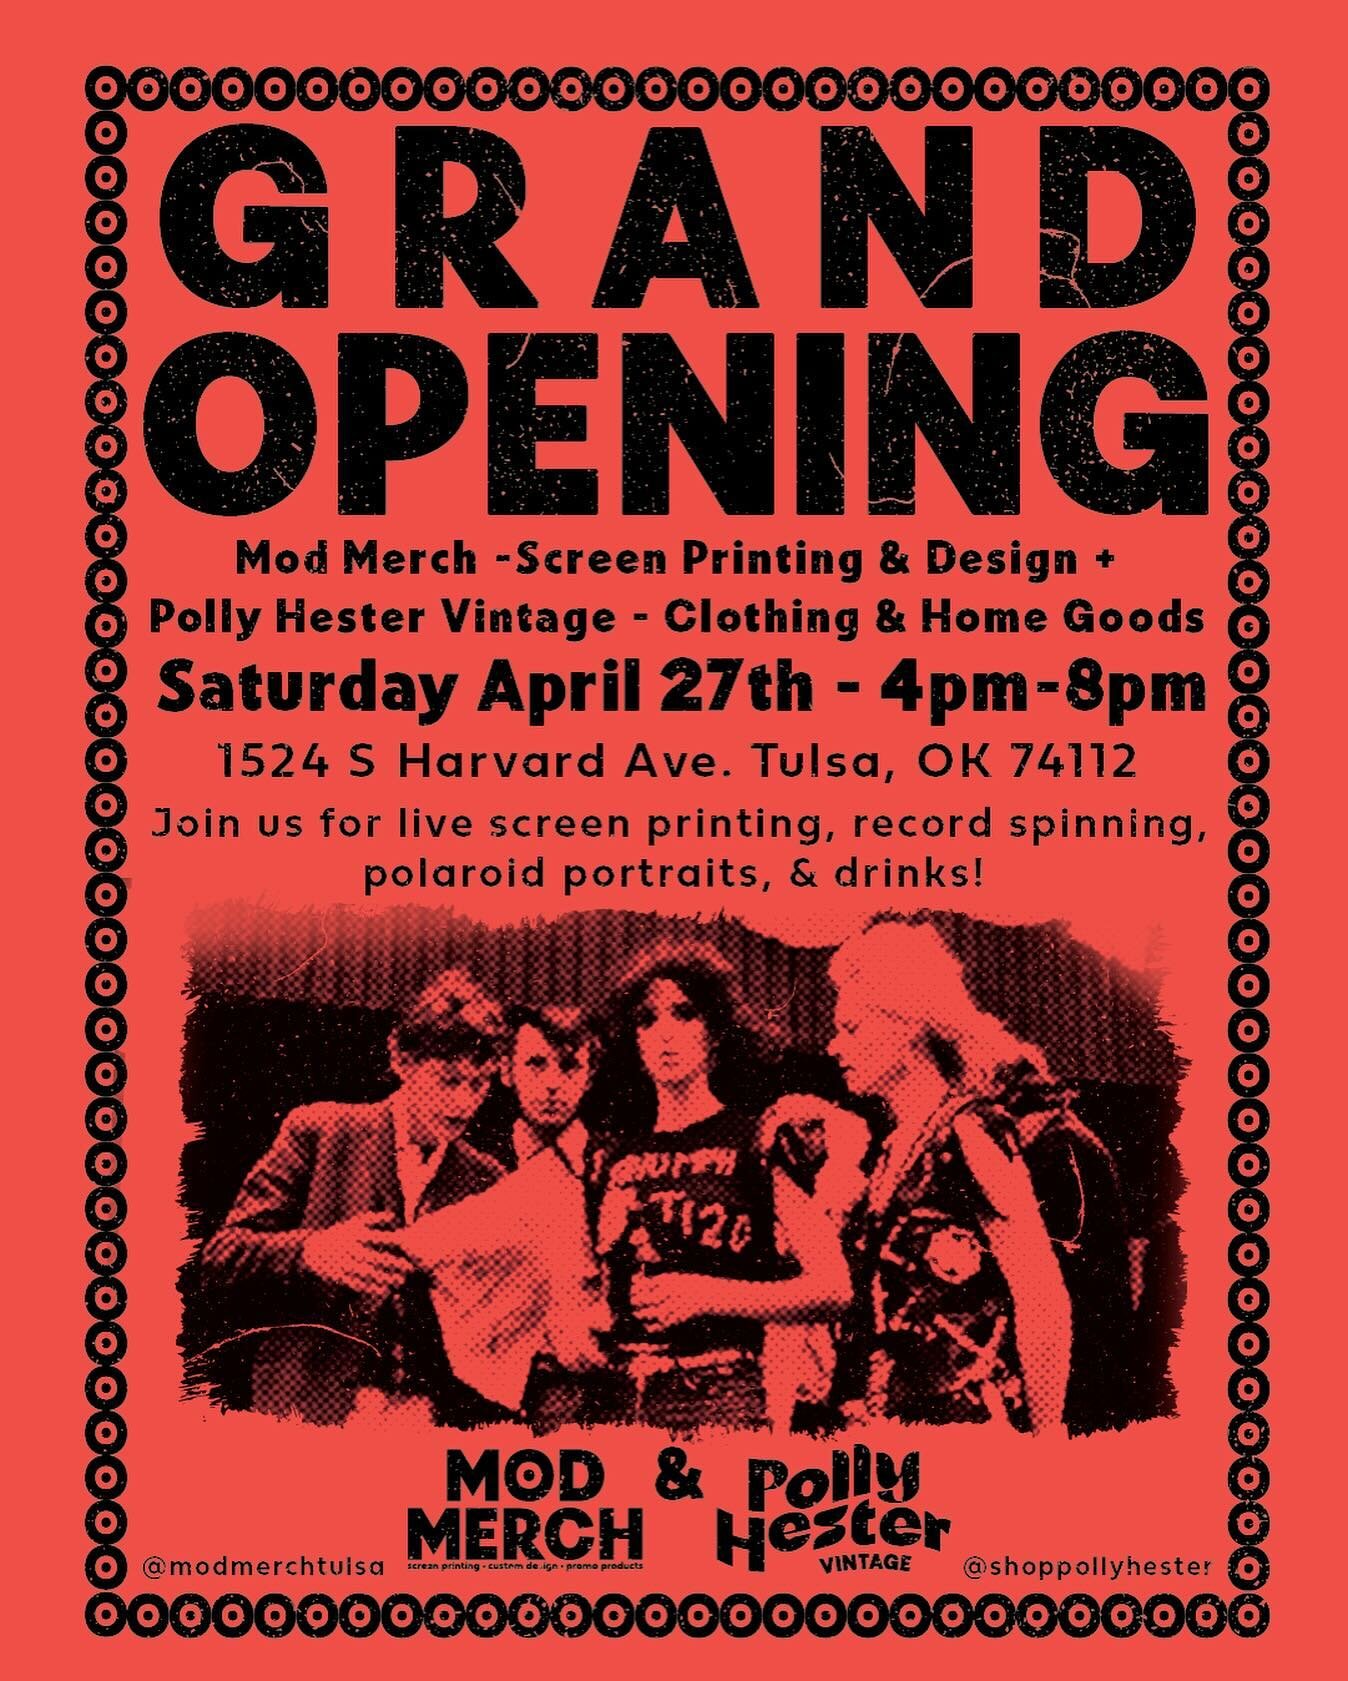 SURPRISE! We are so excited to announce we are opening a brick &amp; mortar shop on Saturday, April 27th alongside our vintage clothing store @shoppollyhester ! 🤩 

Join us from 4-8pm for our grand opening party where we will be live screen printing